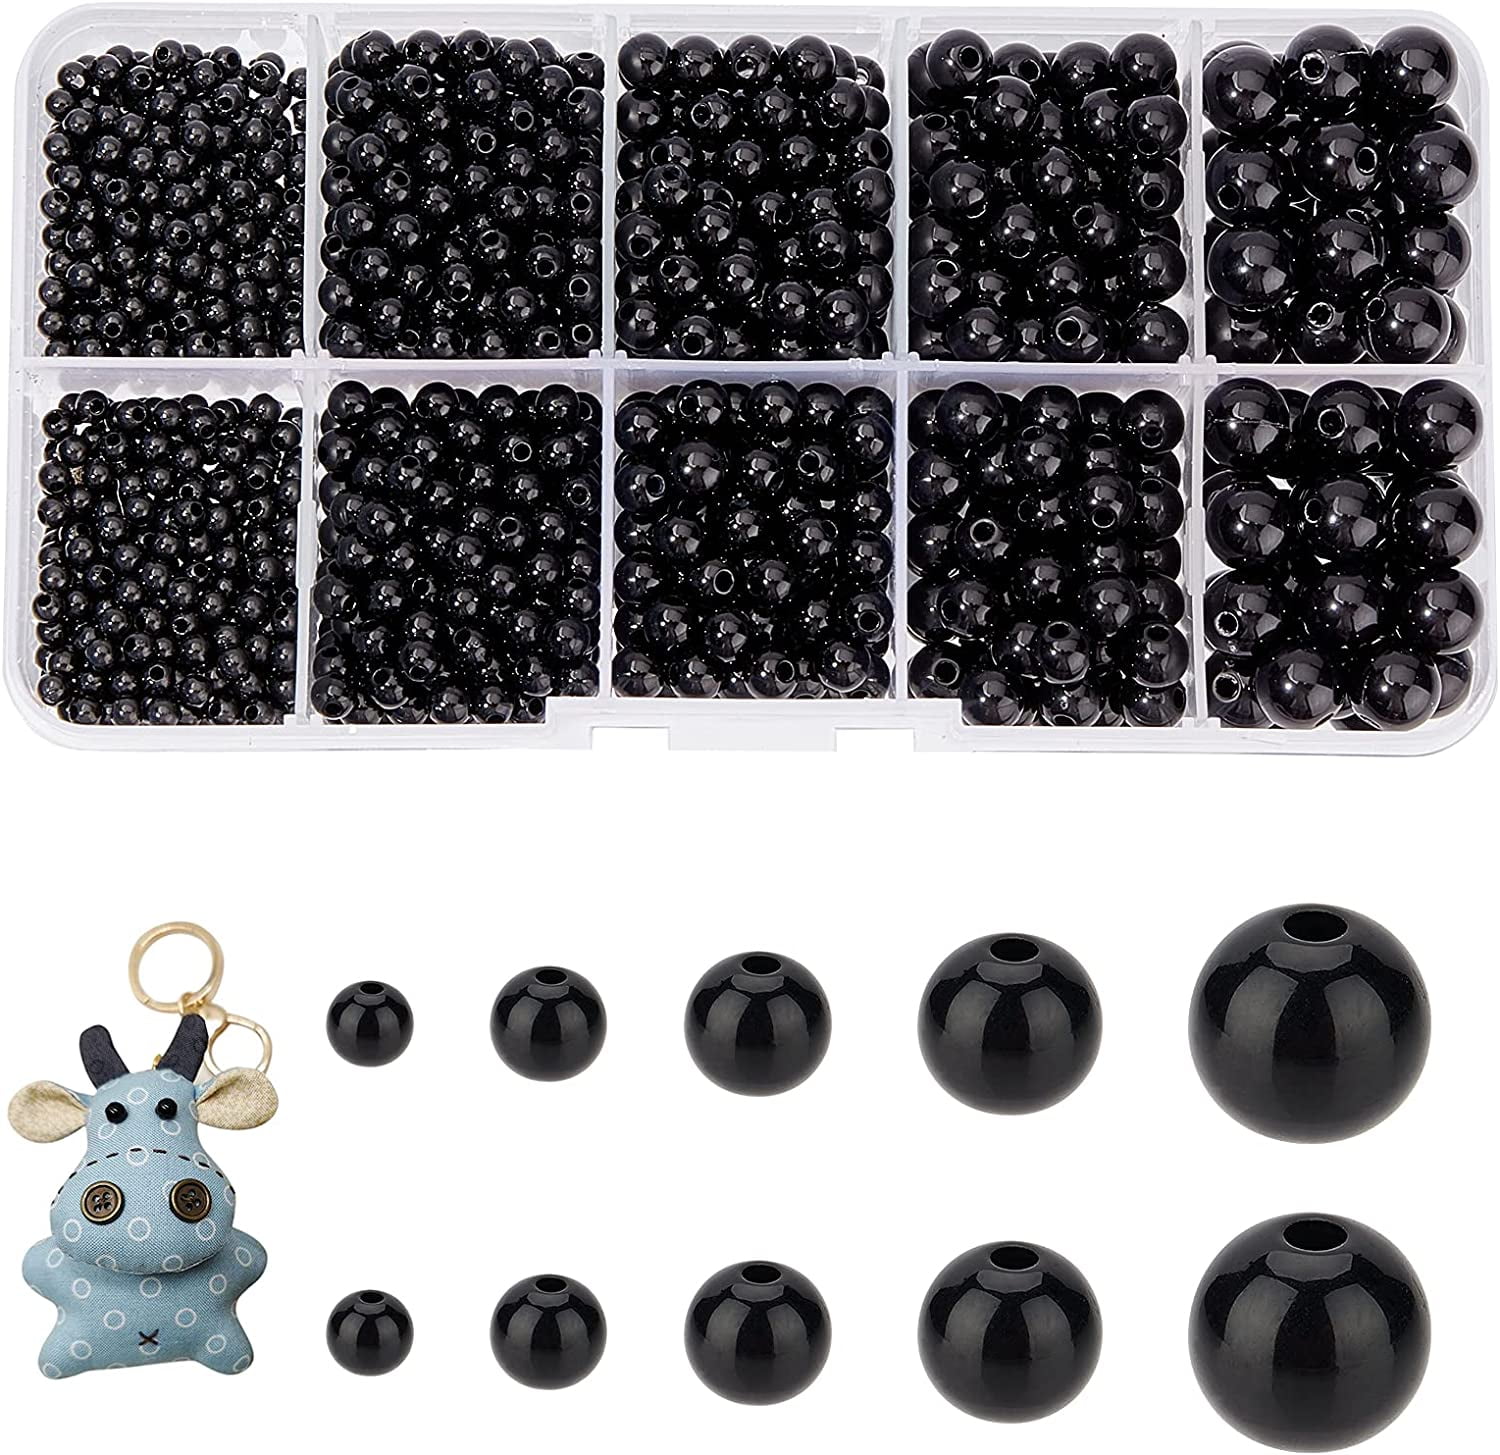 5 Pairs High quality with Washer Safety Plastic Eyes Crafts Puppet Crystal  Eye Bear Animal Accessories